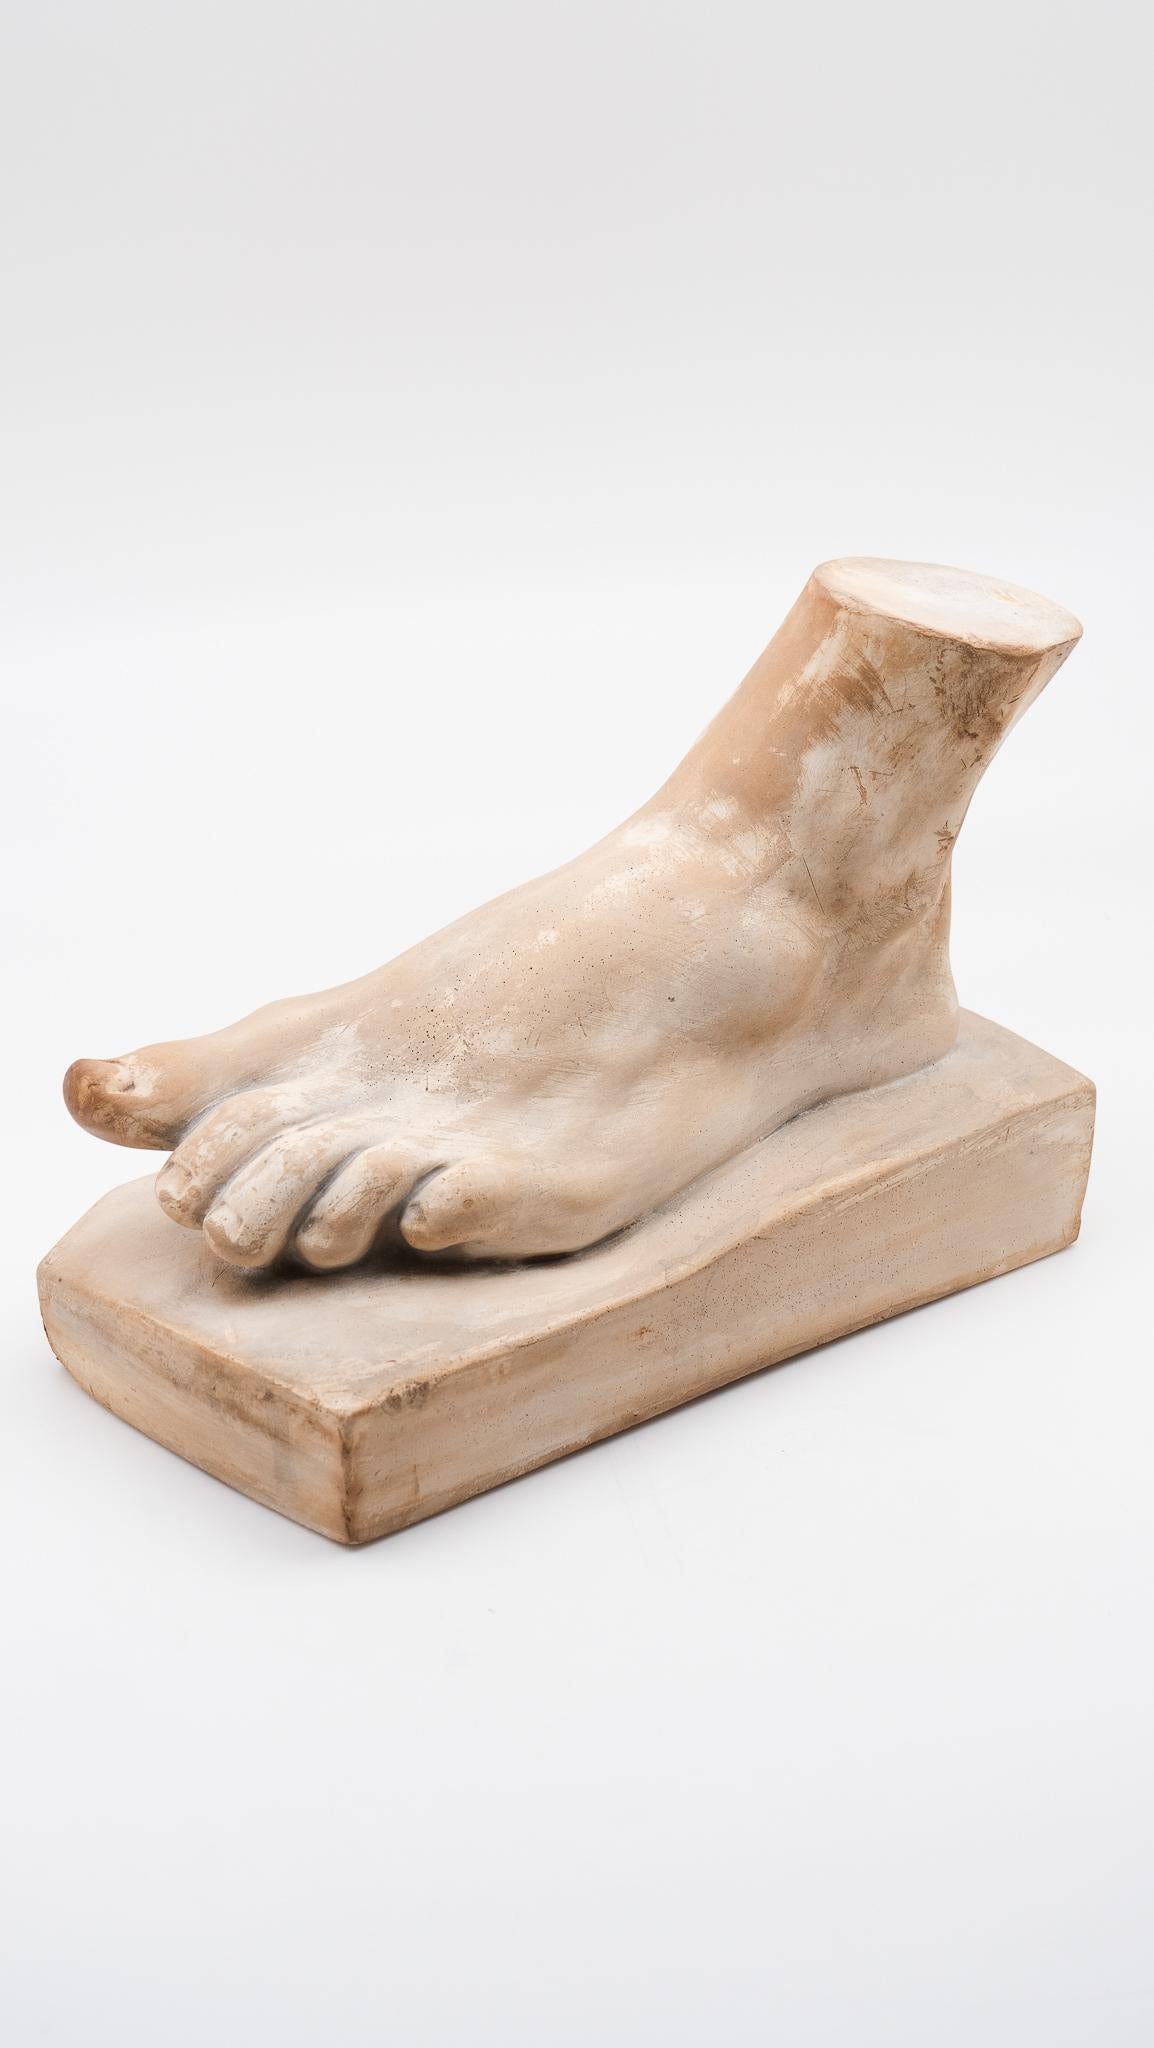 Plaster cast of Hercules' foot by P. P. Caproni, Boston. Between 1892 and 1952, the leading supplier for high-quality plaster casts was P.P. Caproni and Brother in Boston, MA.